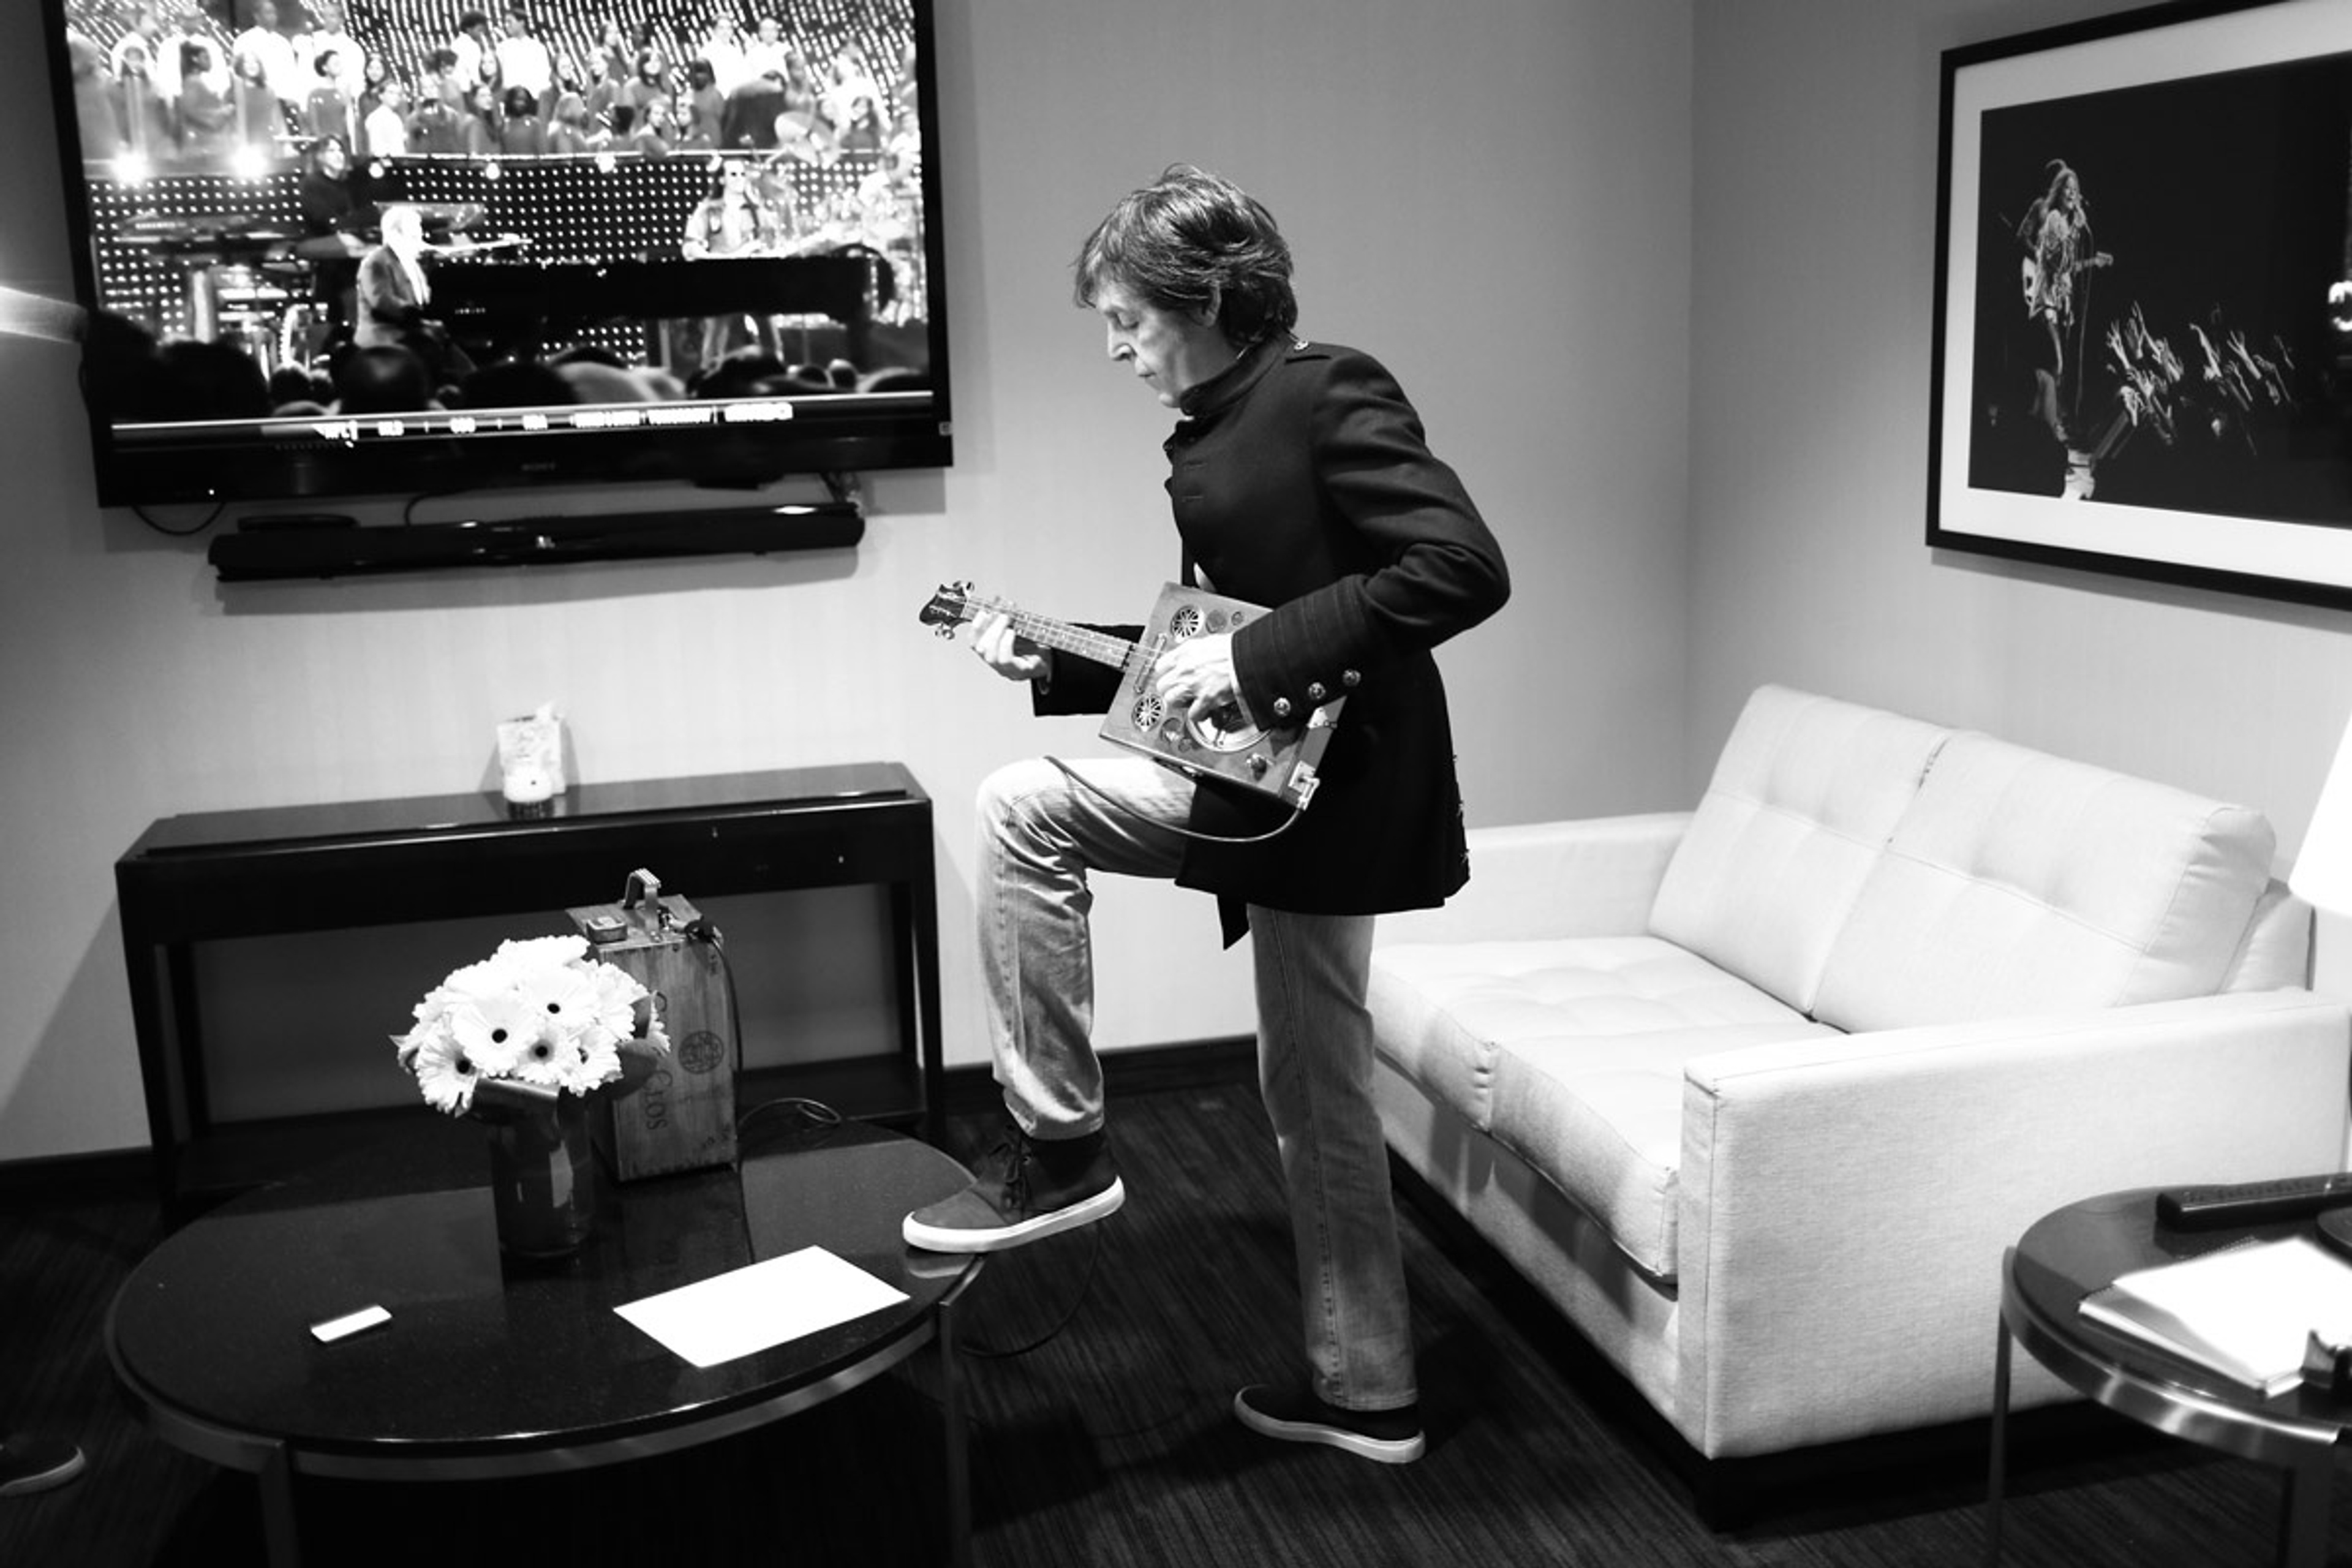 Paul rehearsing backstage, 12-12-12 Hurricane Sandy Benefit, Madison Square Garden, NYC, 12th December 2012